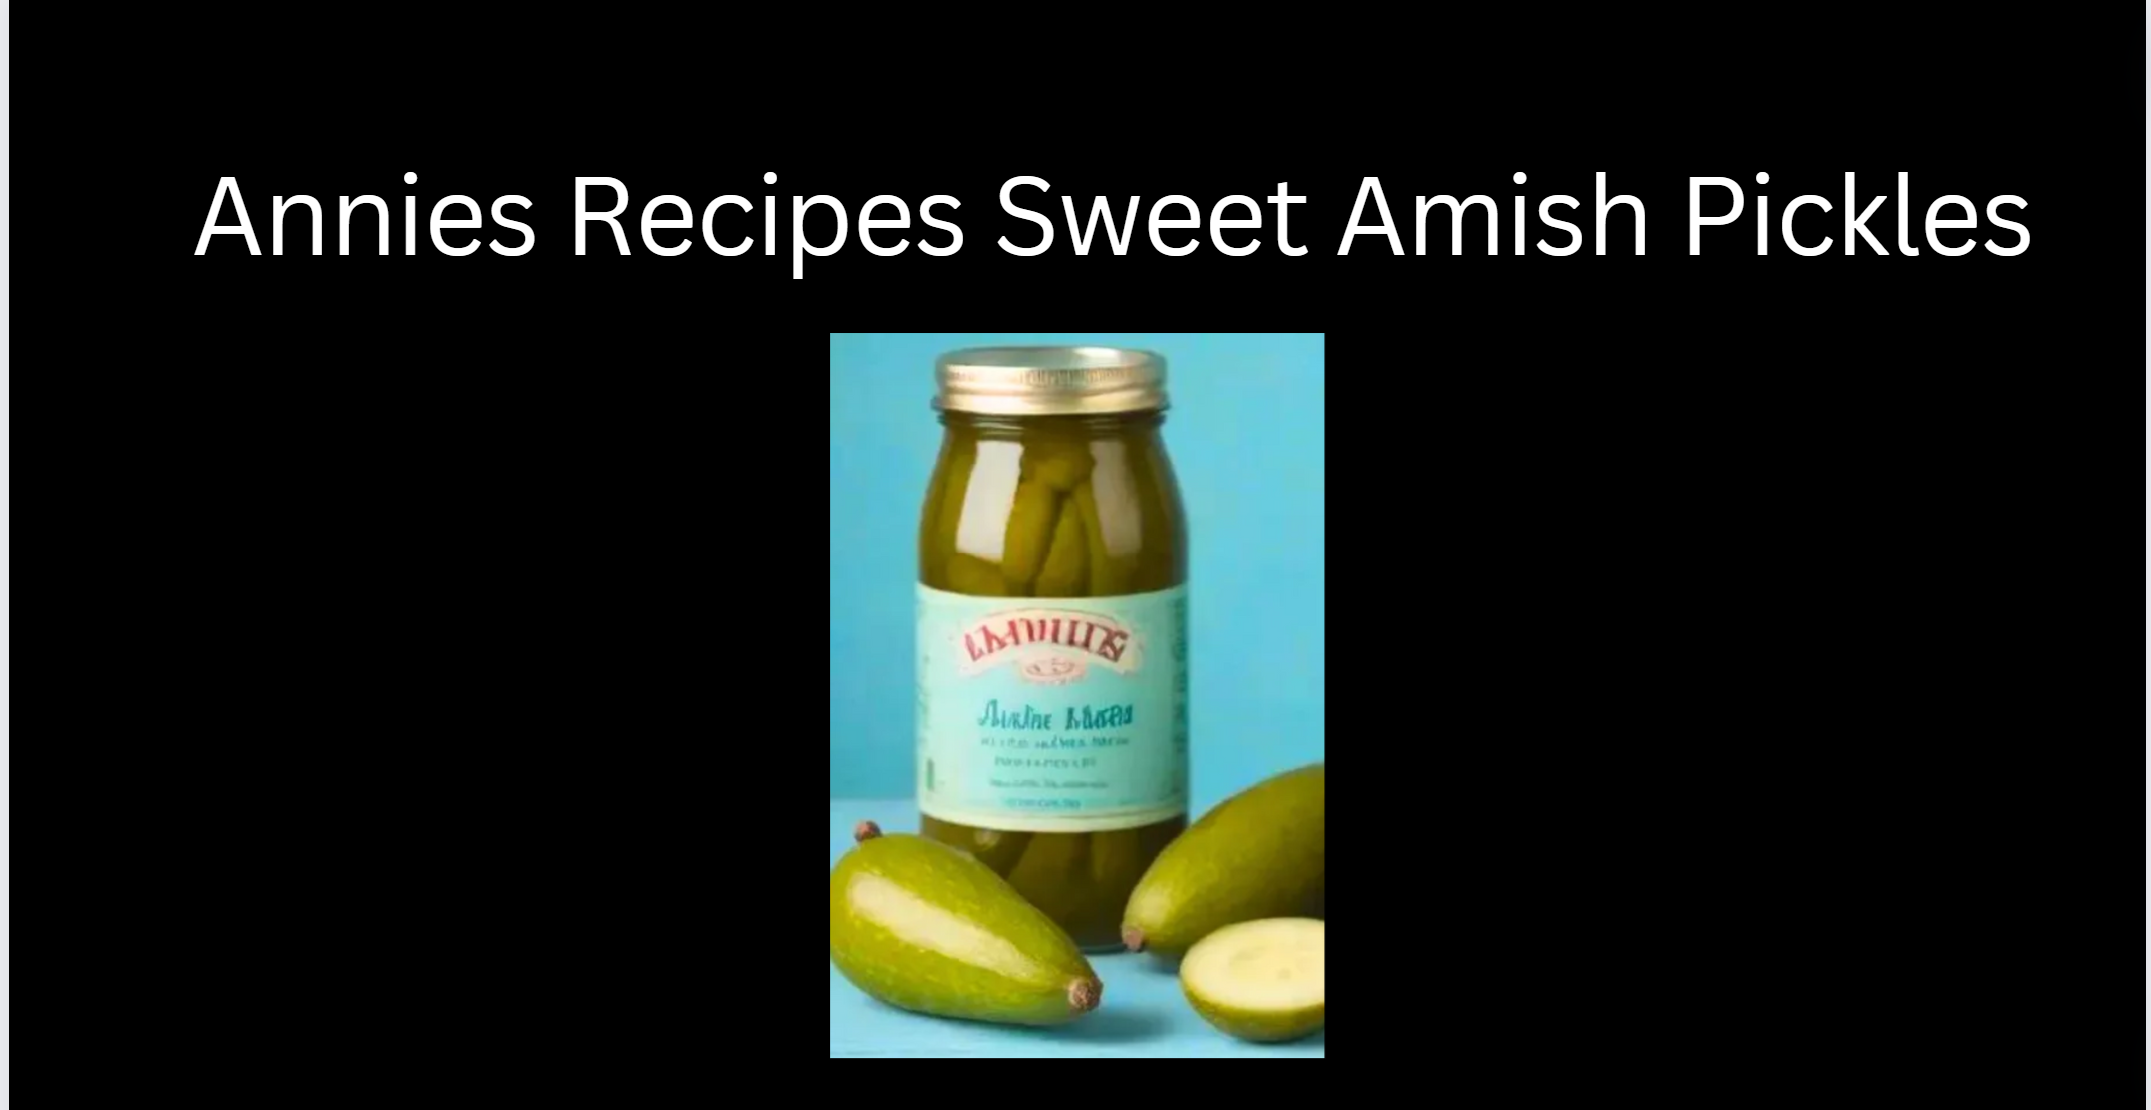 Annies Recipes Sweet Amish Pickles